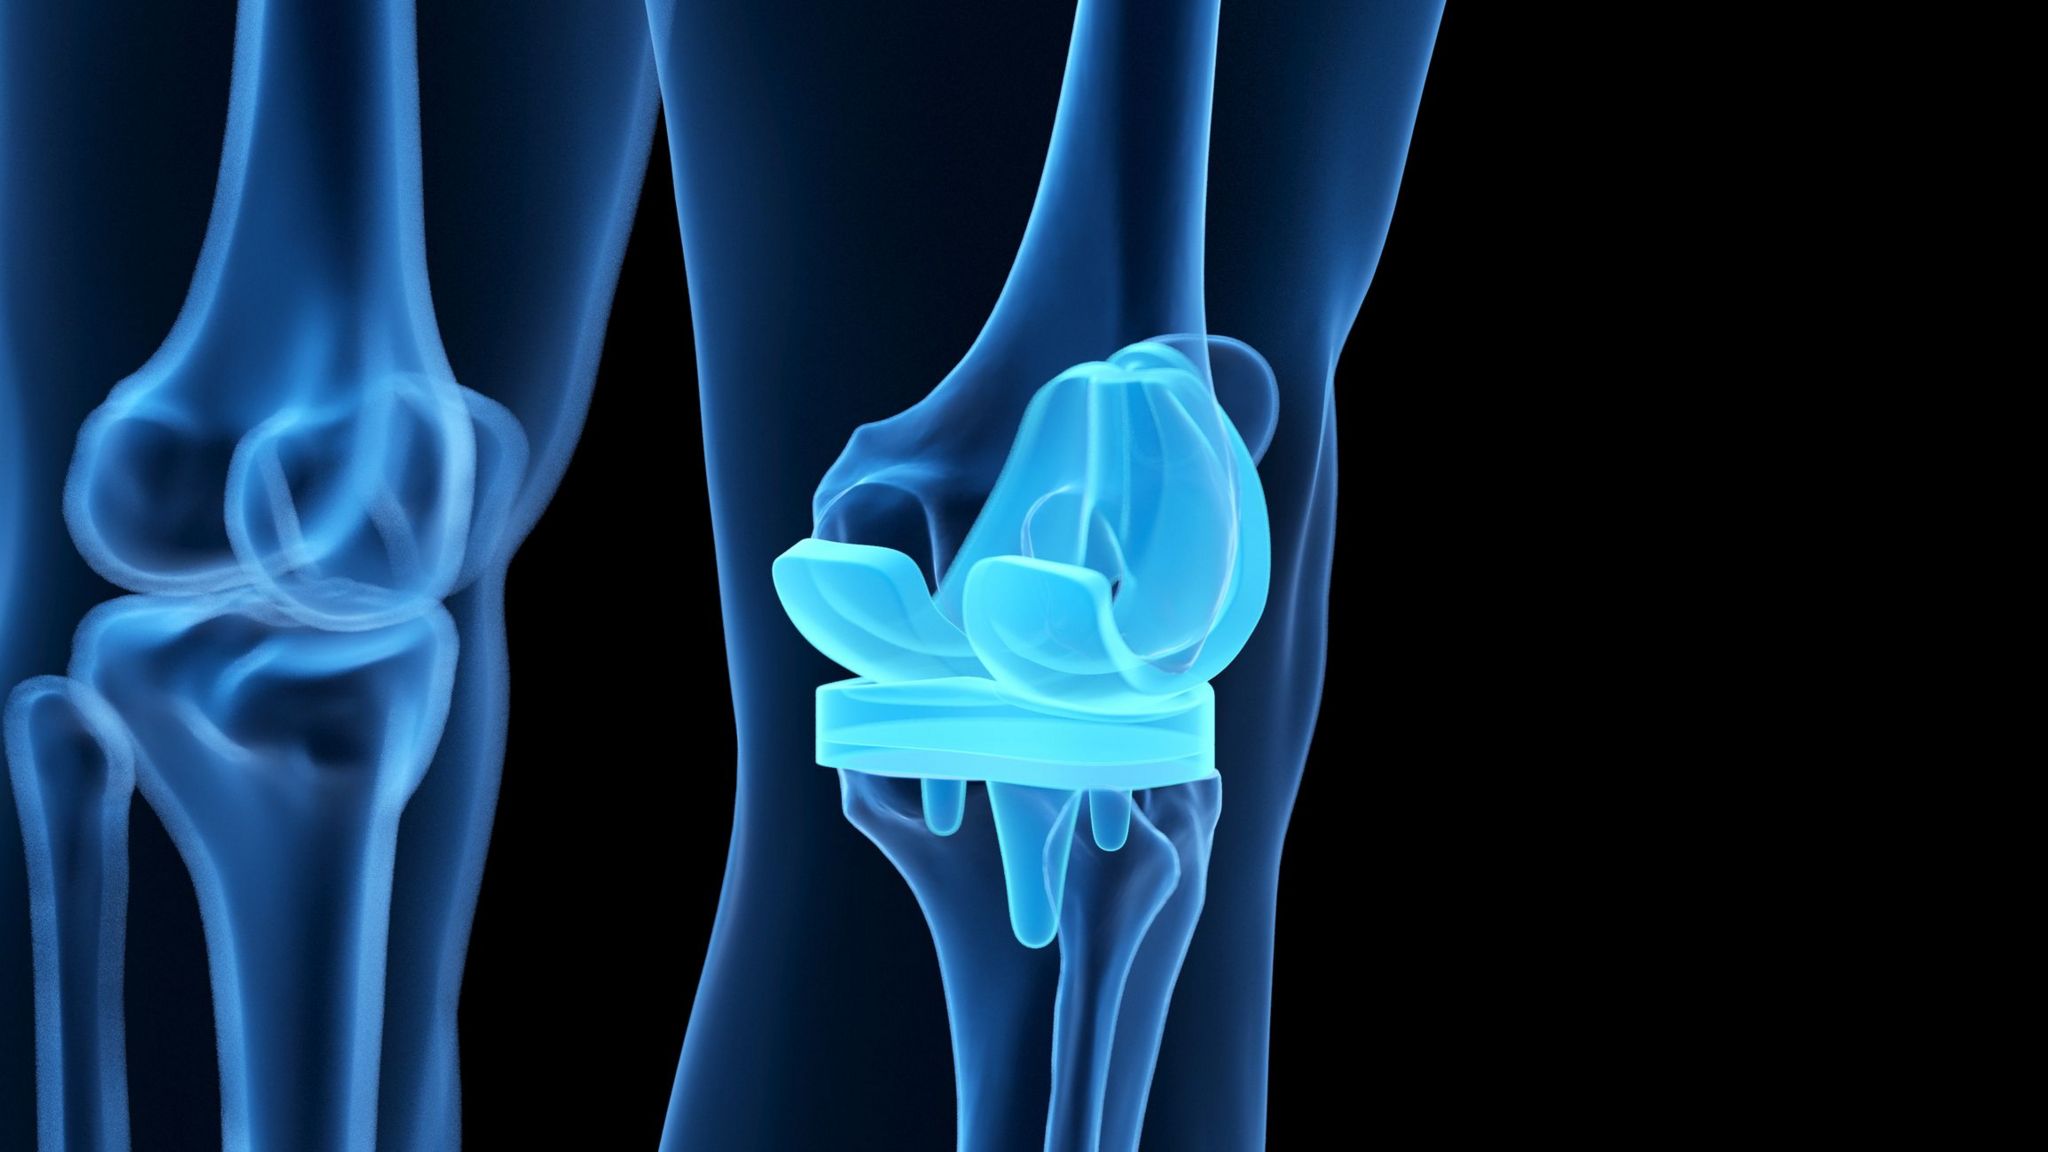 Knee replacement joint image